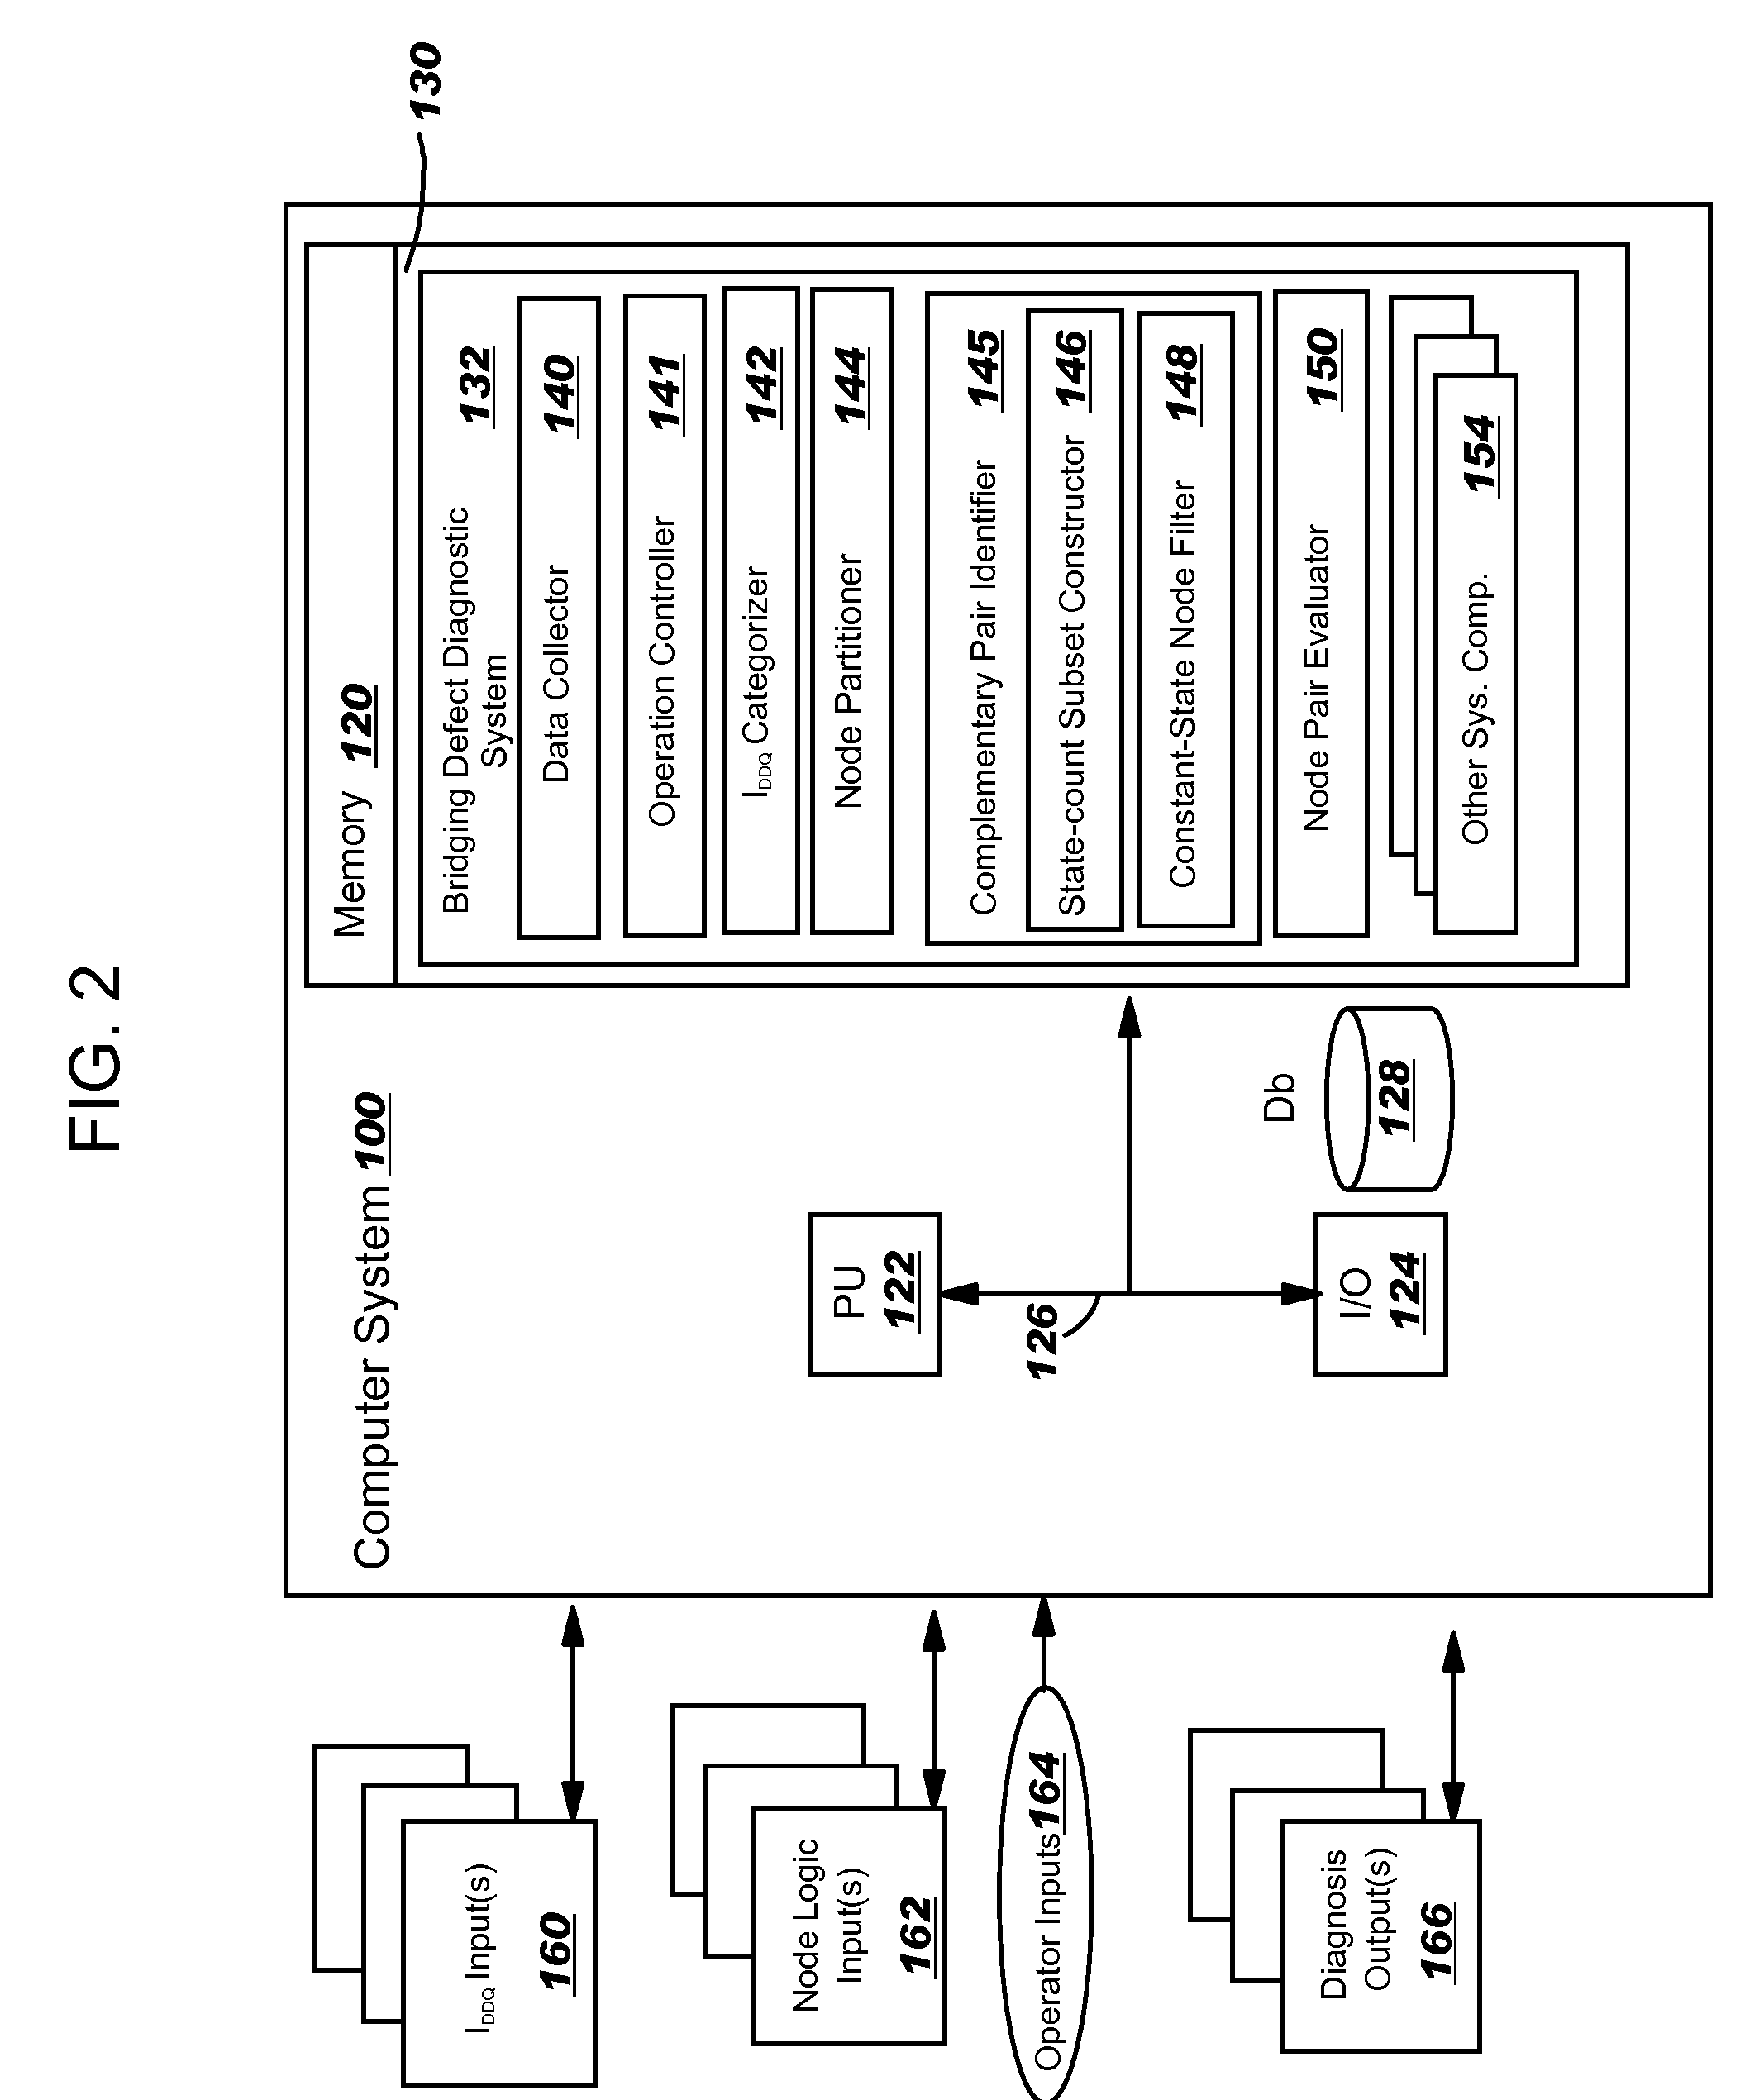 Exhaustive diagnosis of bridging defects in an integrated circuit